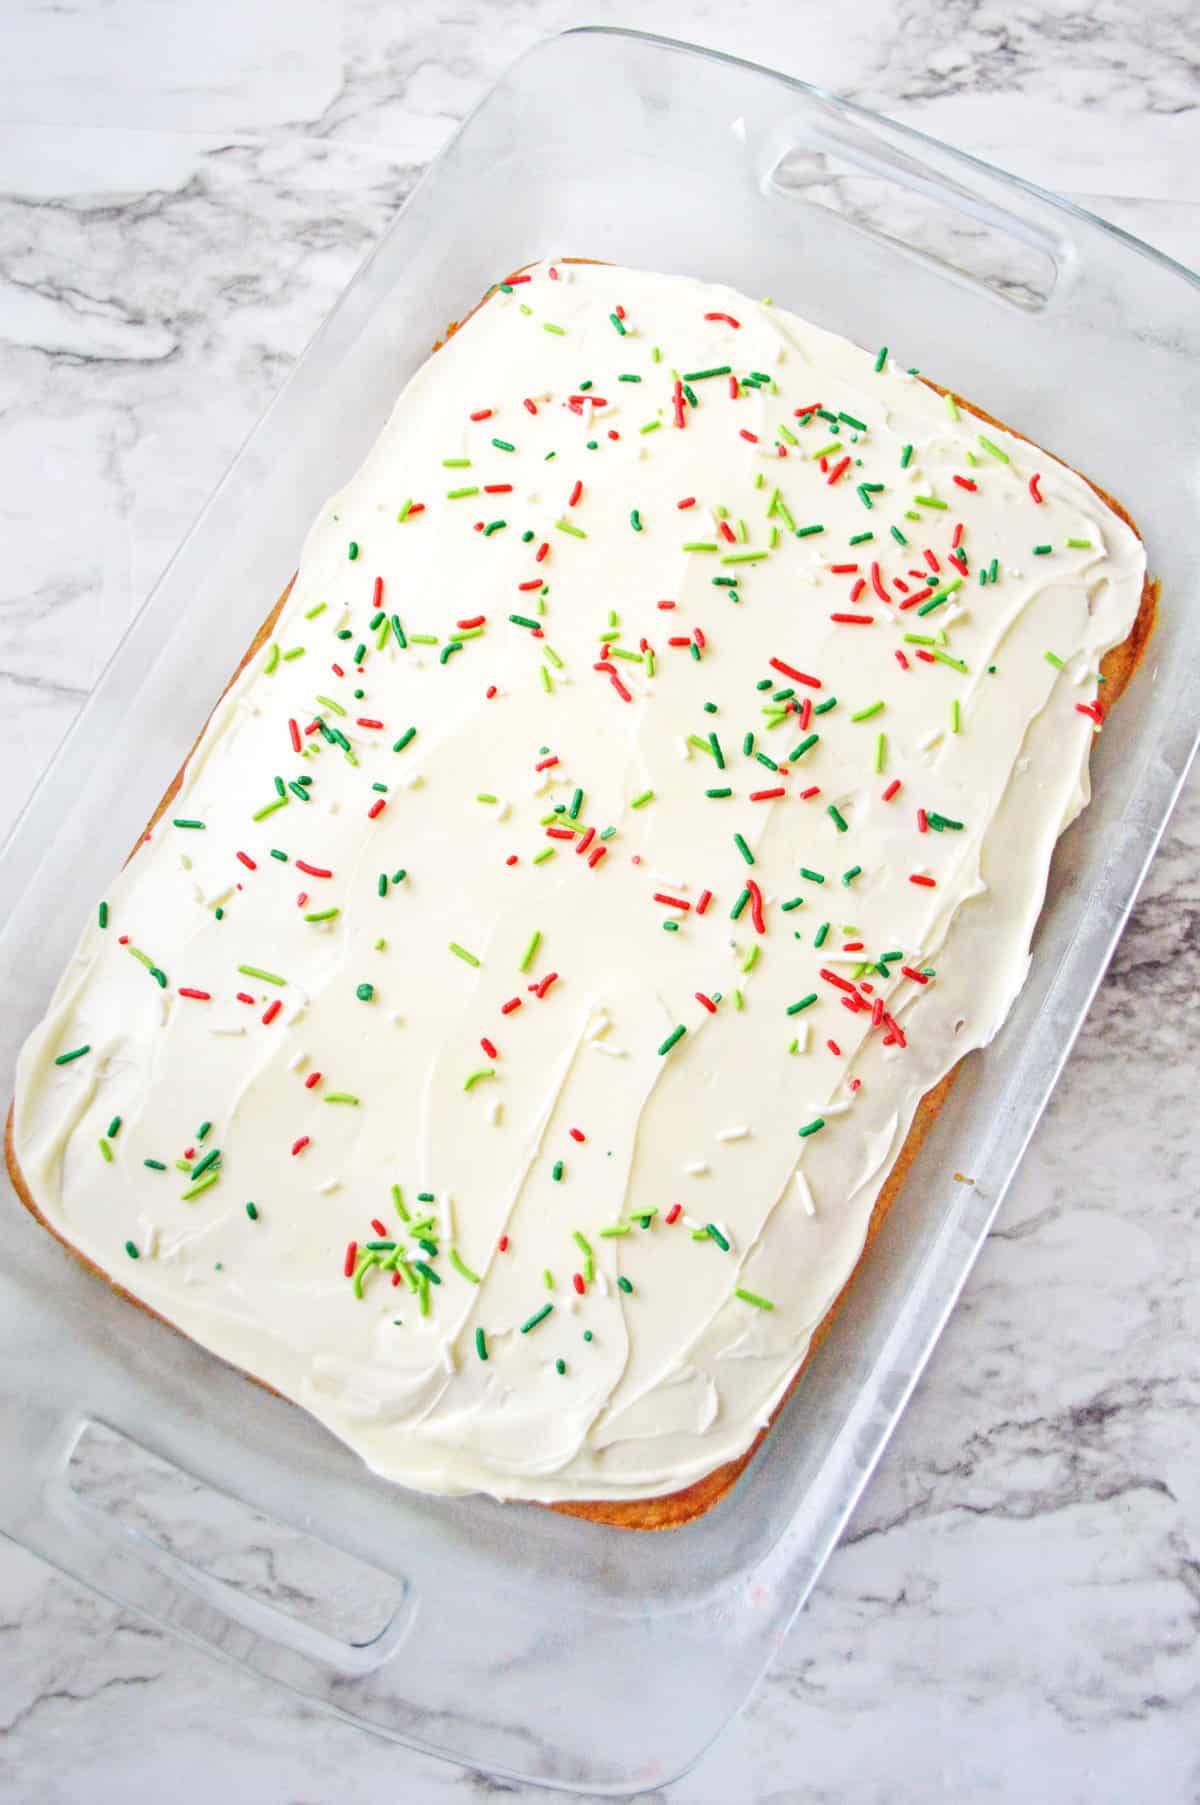 Rectangular cake in 9x13 baking dish topped with vanilla frosting and christmas sprinkles.